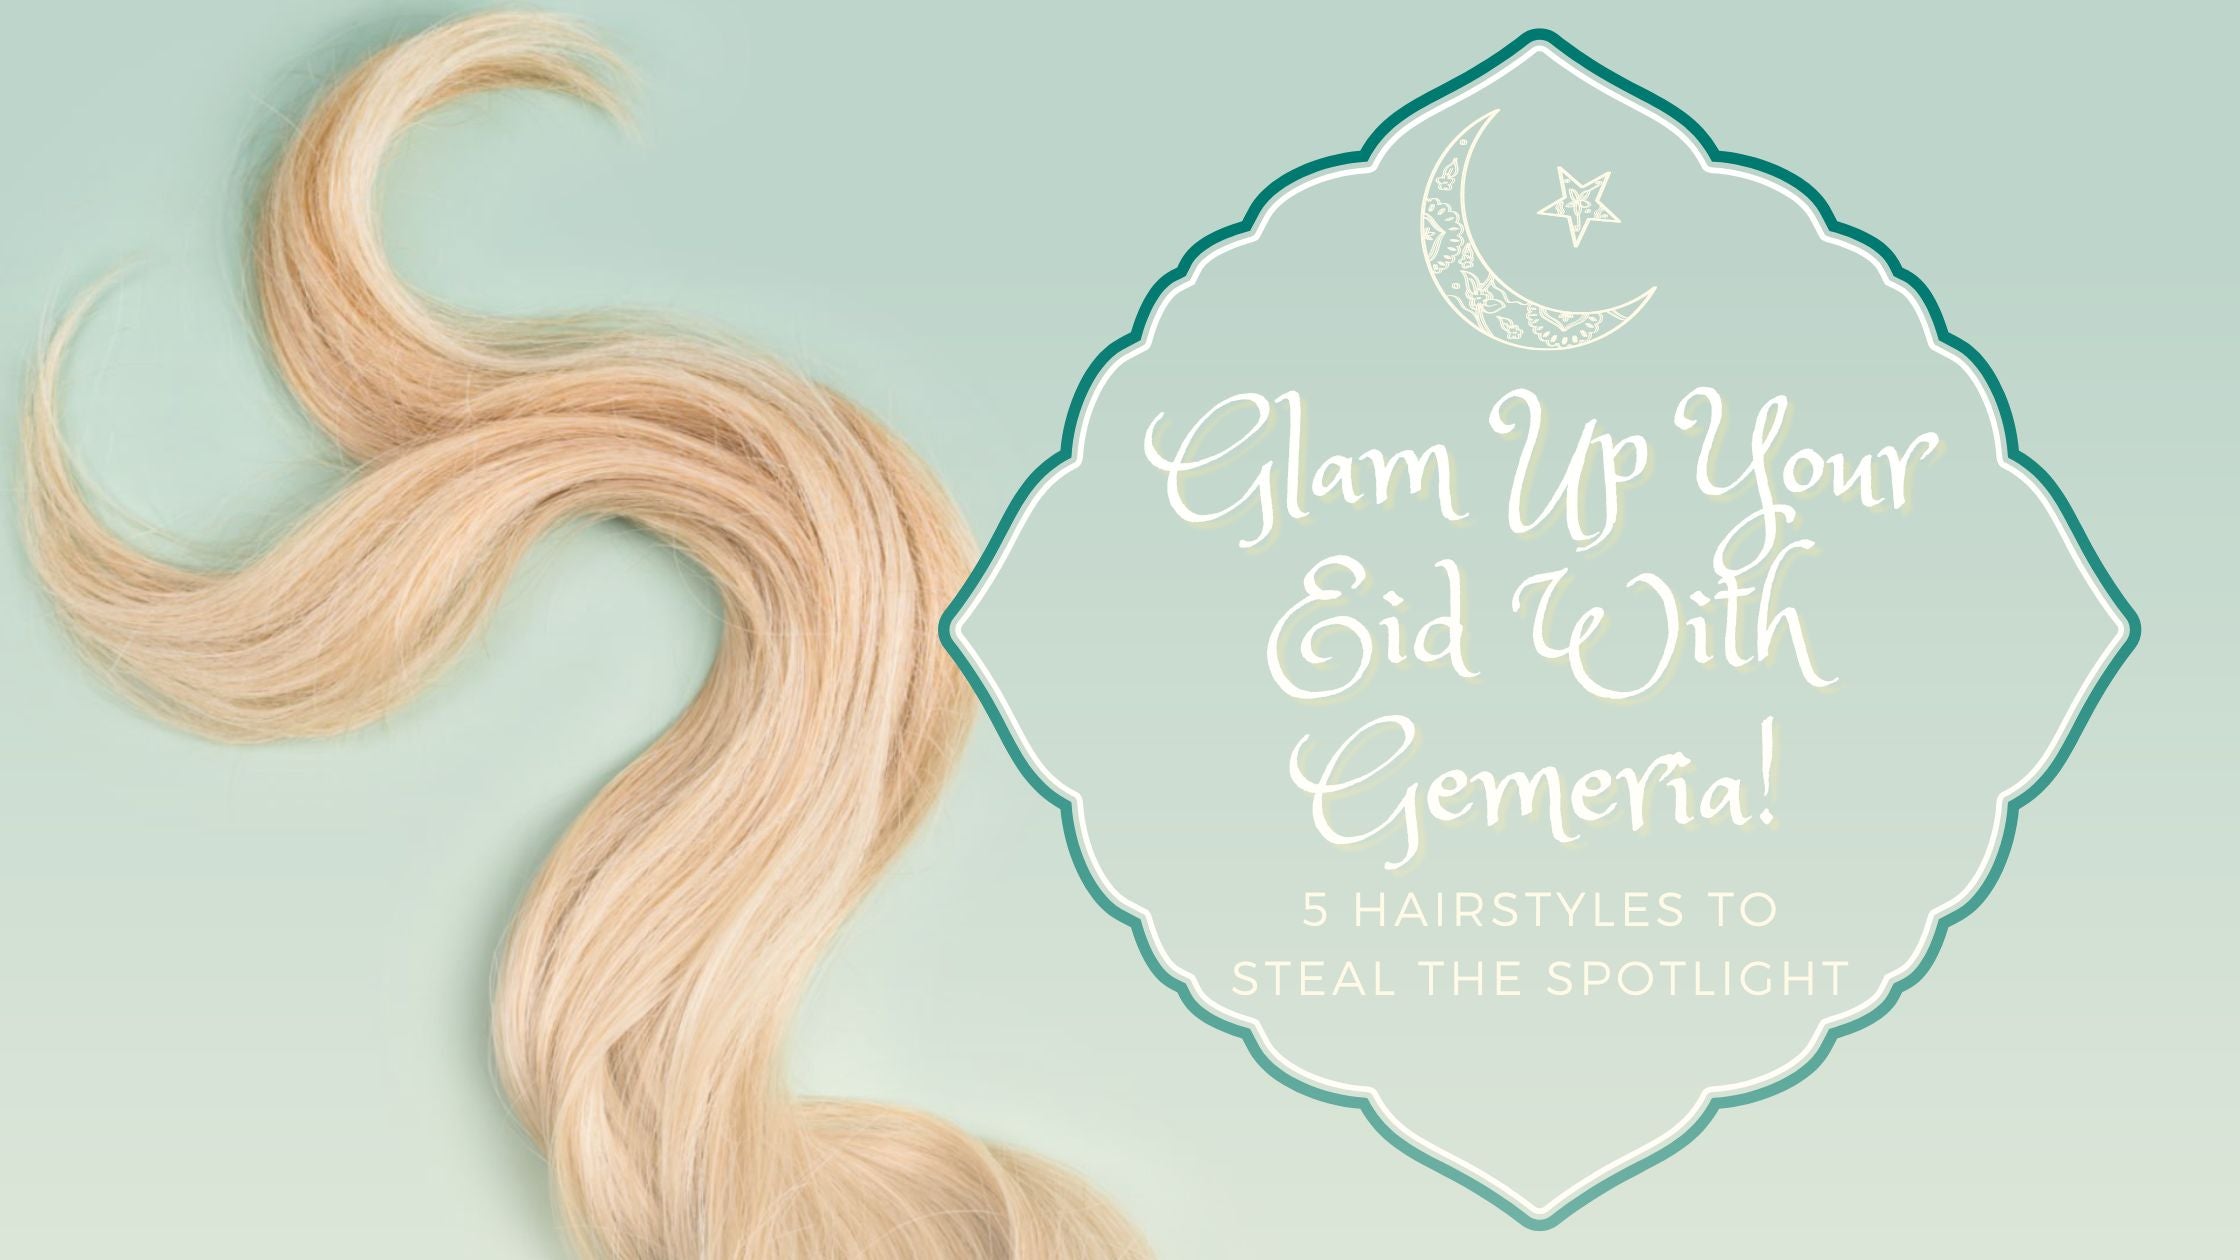 5-hairstylesfor-eid-to-steal-the-spotlight